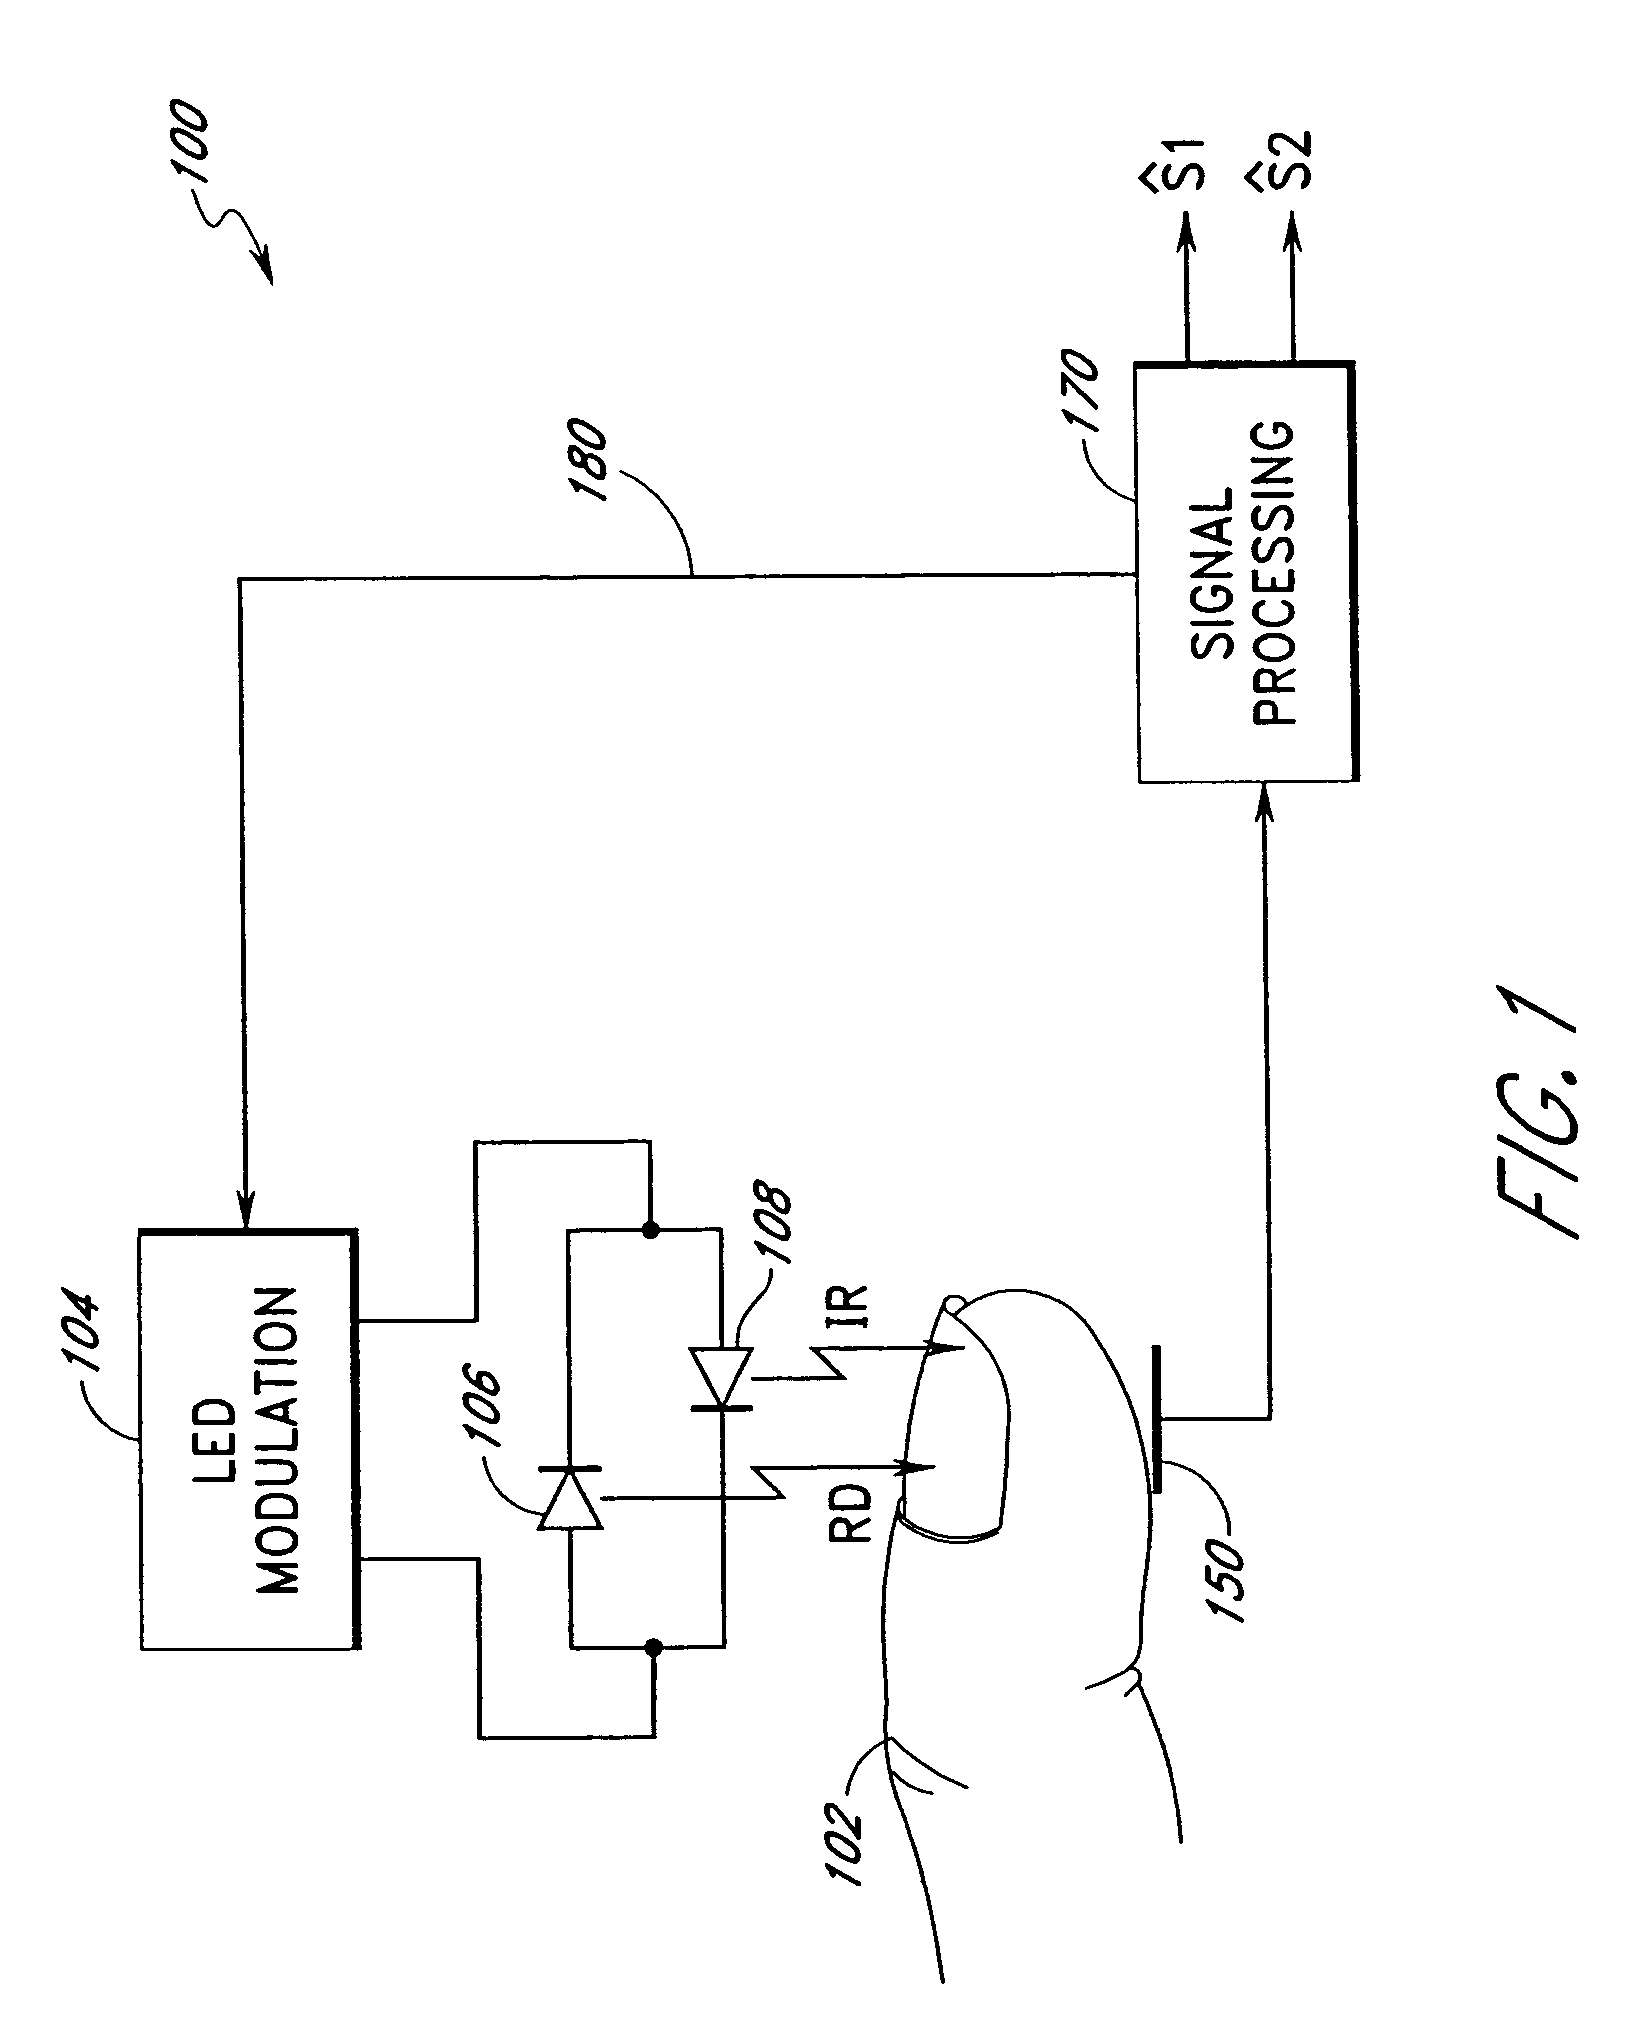 Method and apparatus for demodulating signals in a pulse oximetry system